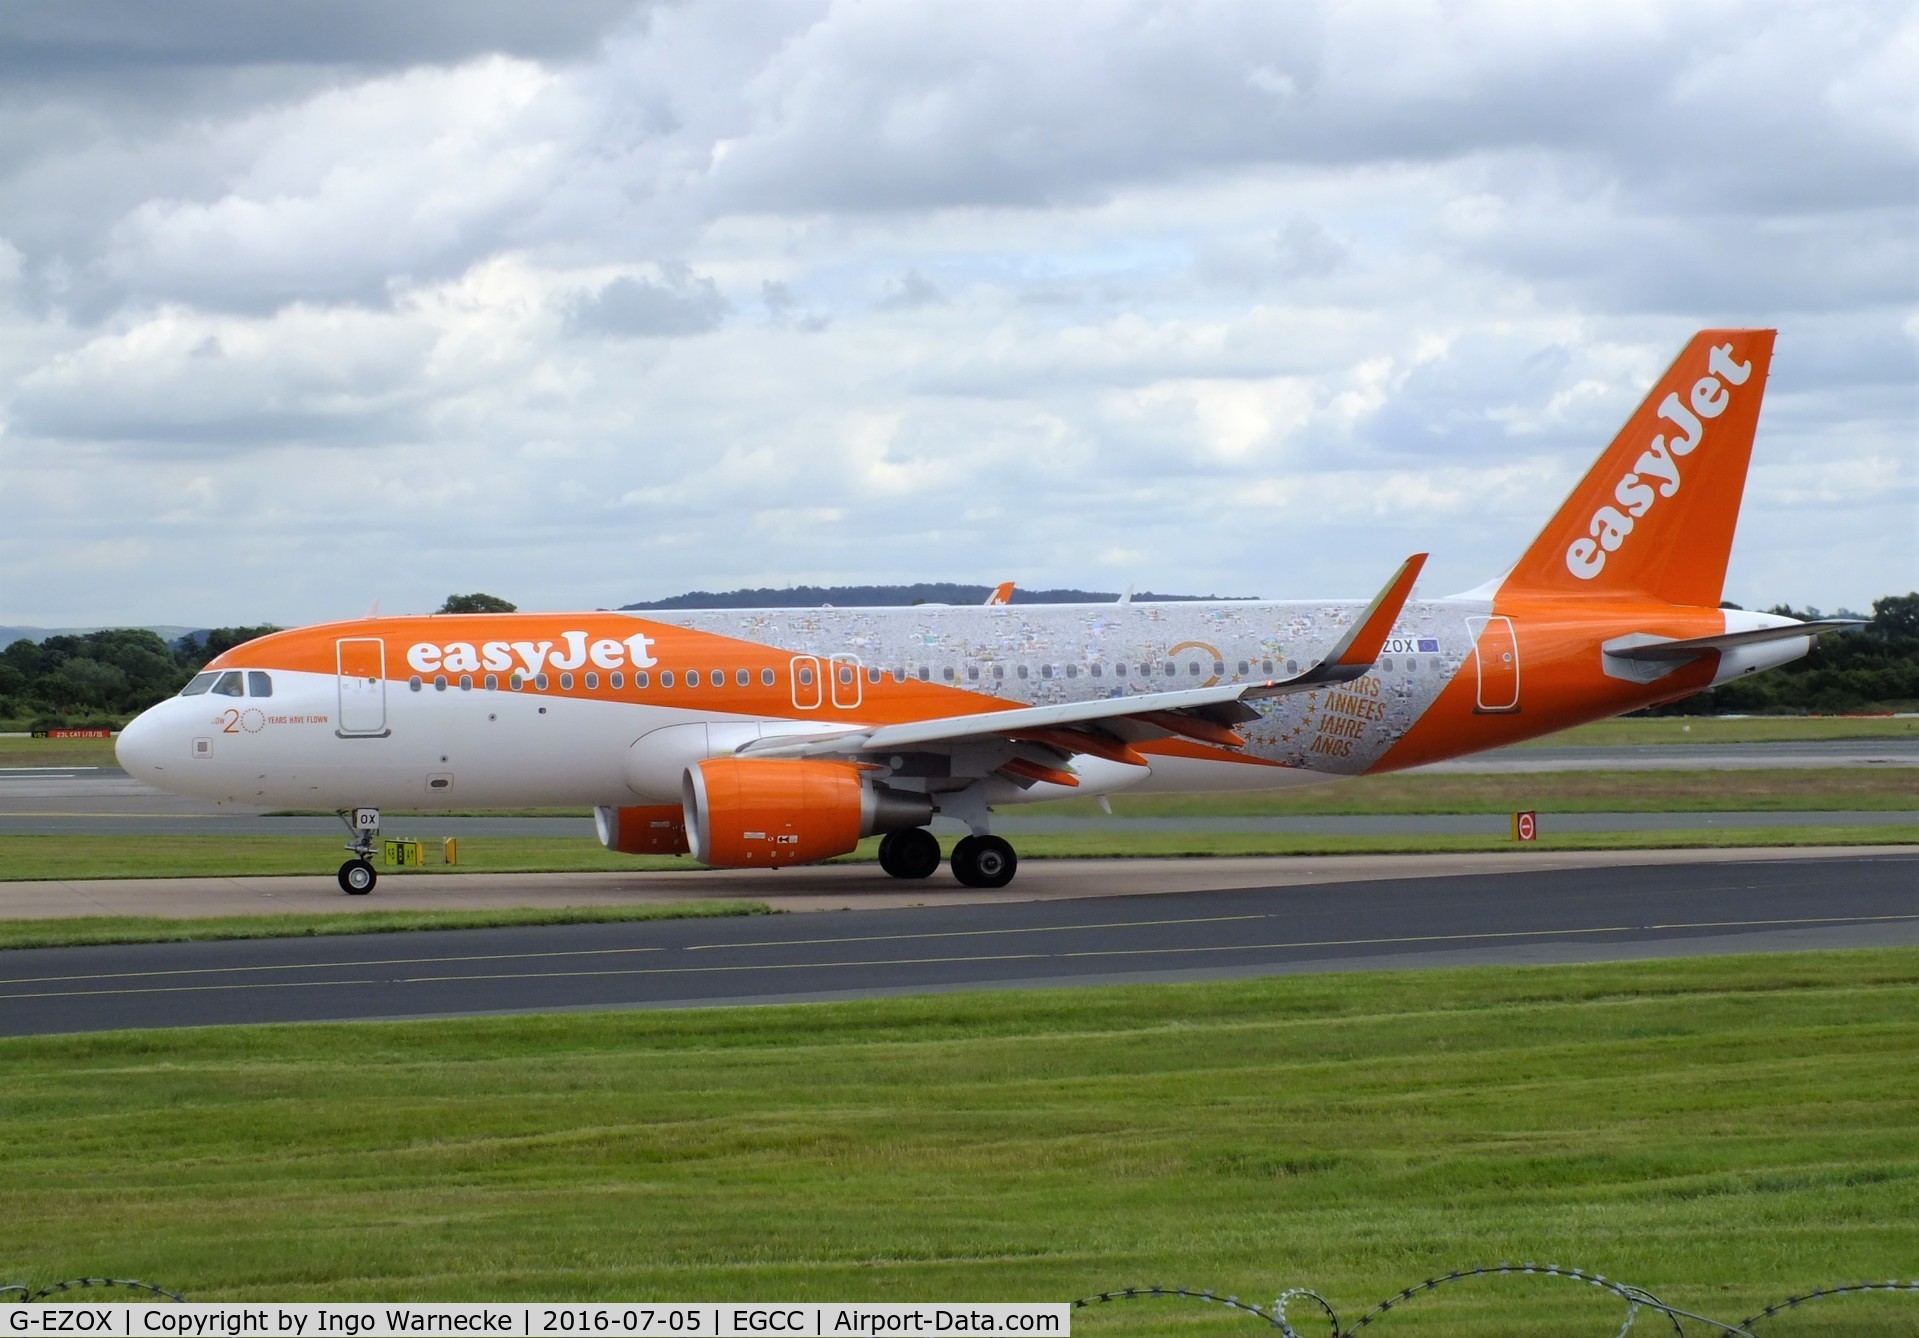 G-EZOX, 2015 Airbus A320-214 C/N 6837, Airbus A320-214 of easyJet in special '20 years jubilee' colours at Manchester airport